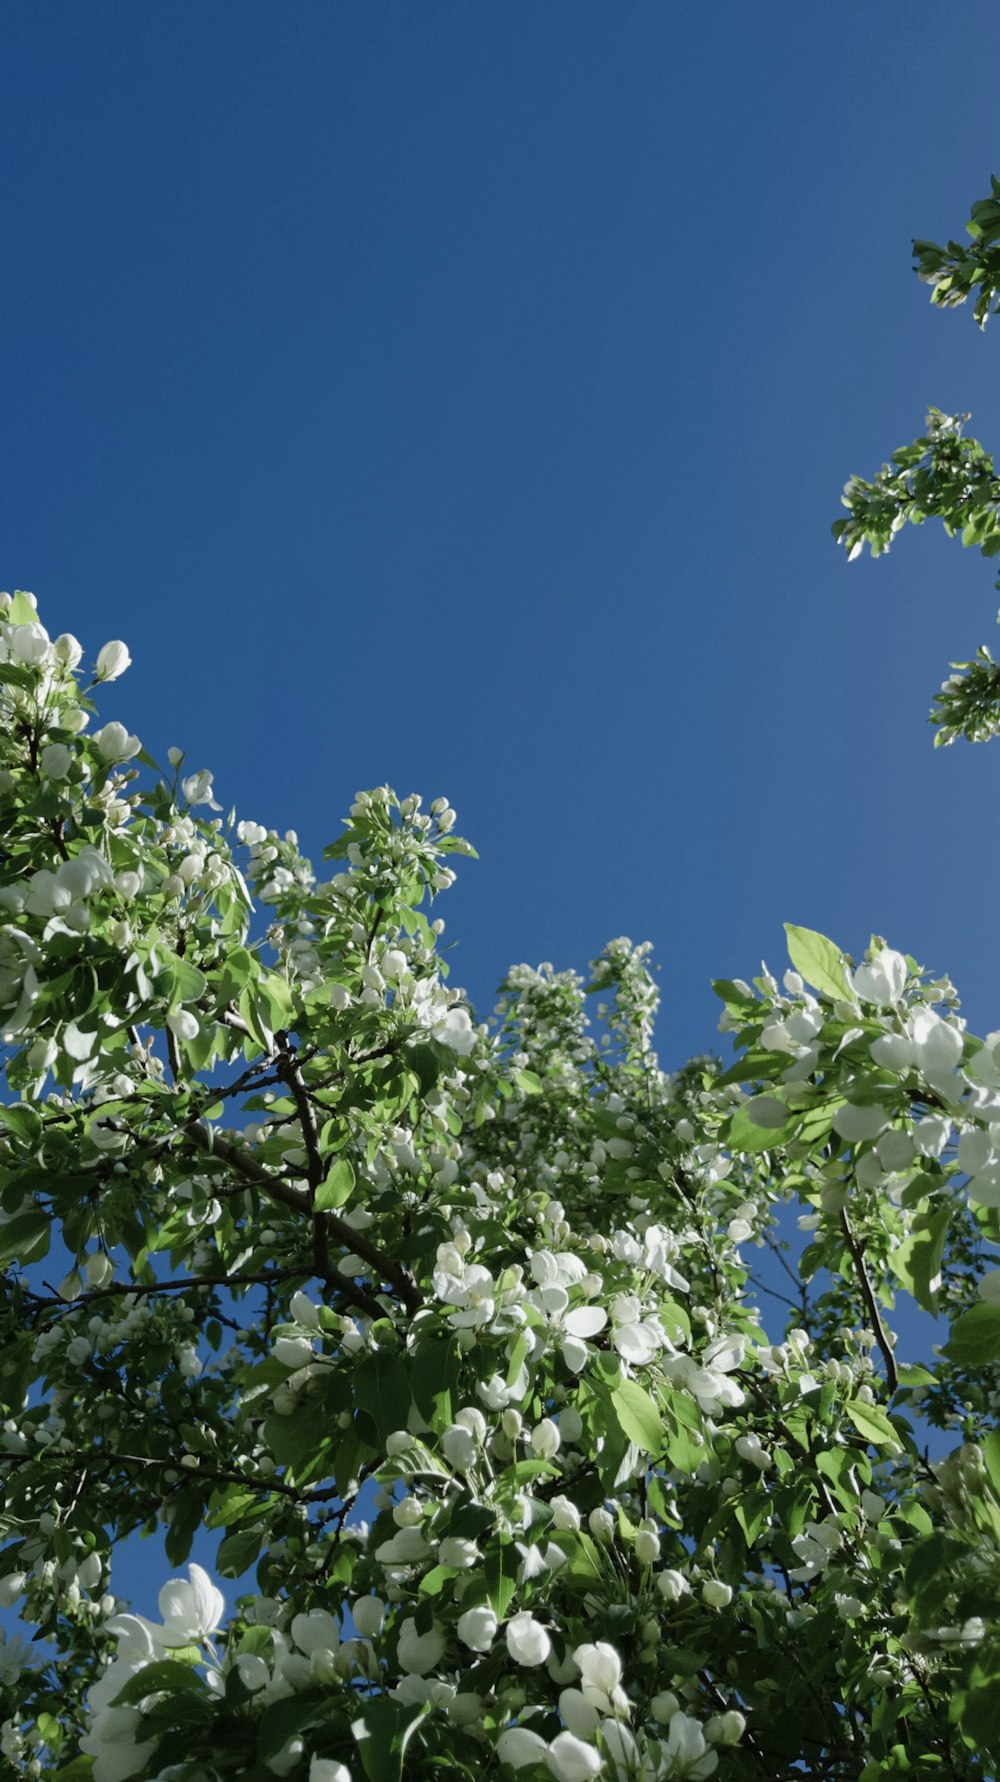 a tree with white flowers in the foreground and a blue sky in the background